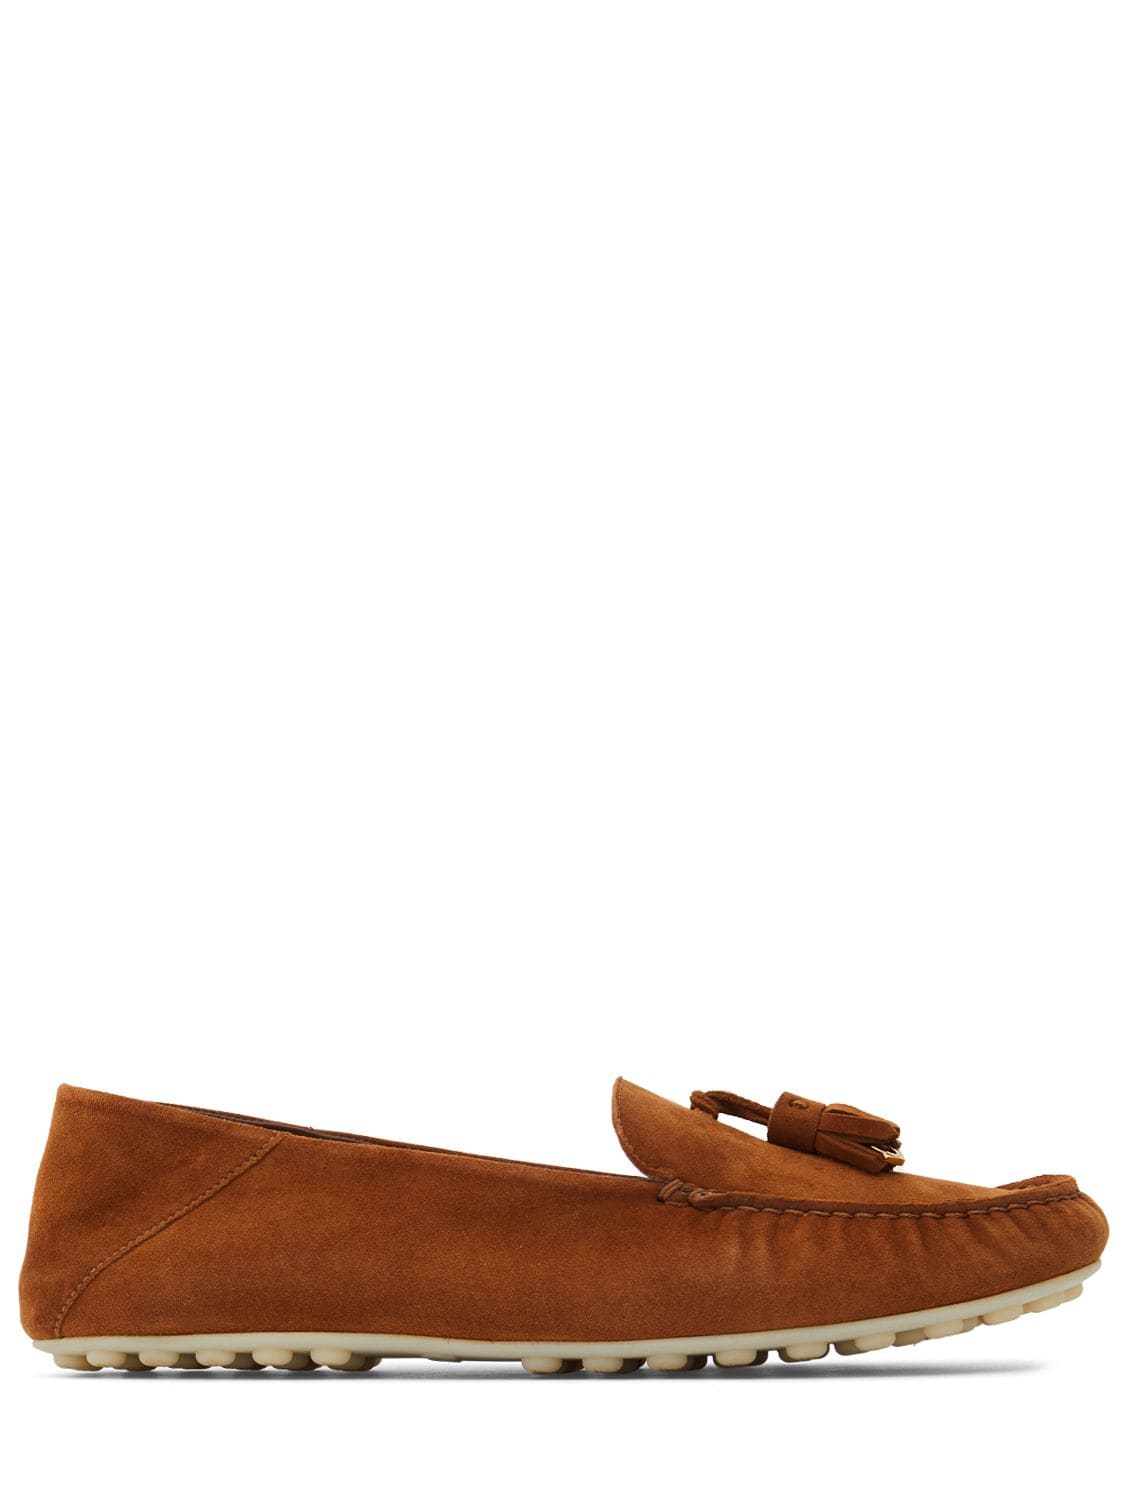 Loro Piana Dot Sole Suede Loafers In Brown